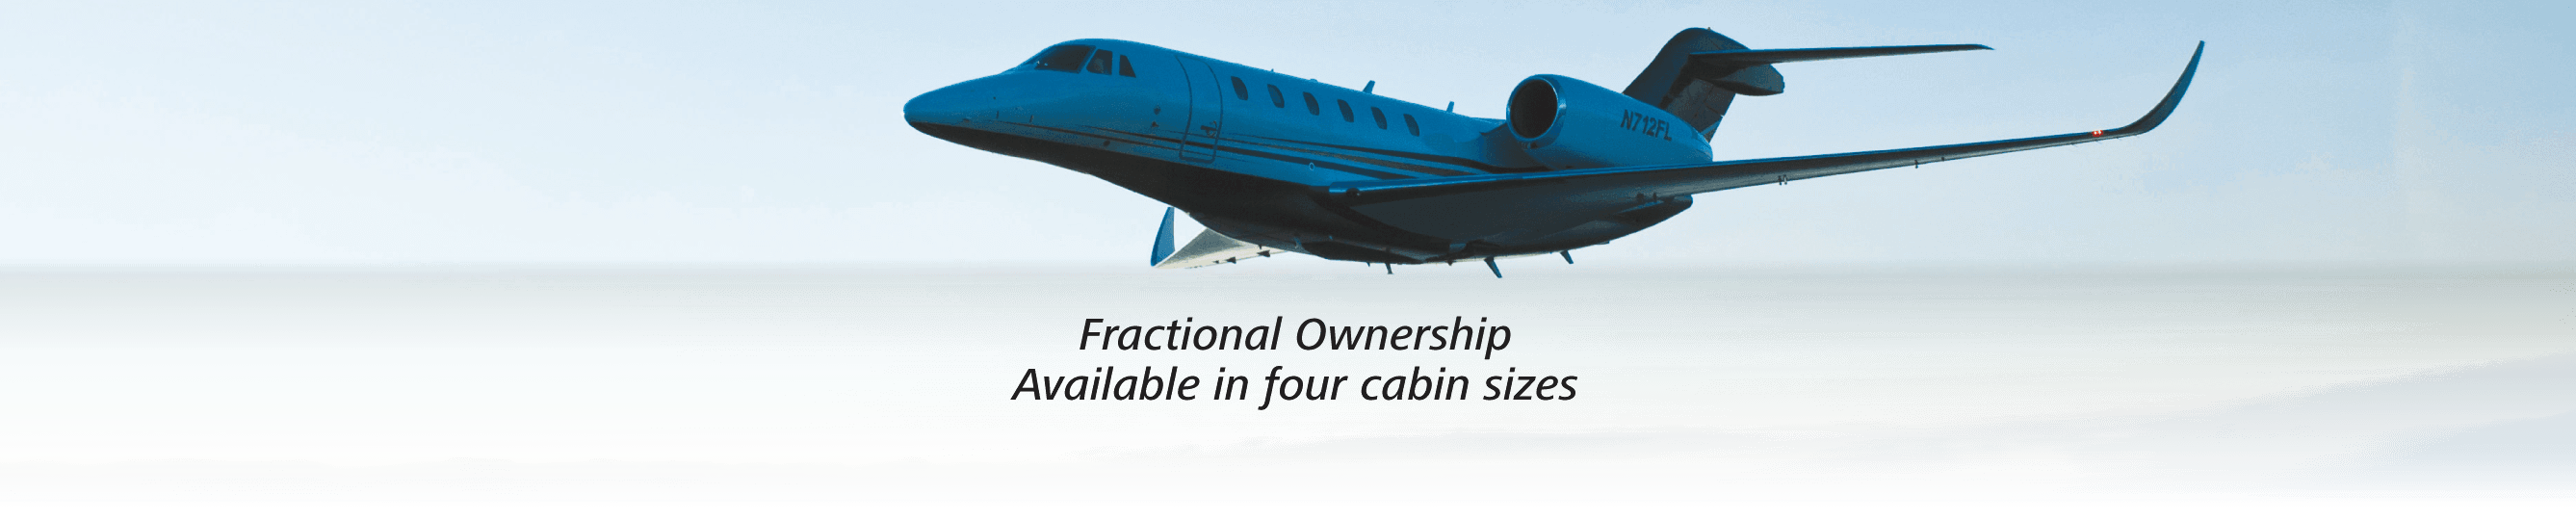 Flight Options Fractional Private Jet Ownership